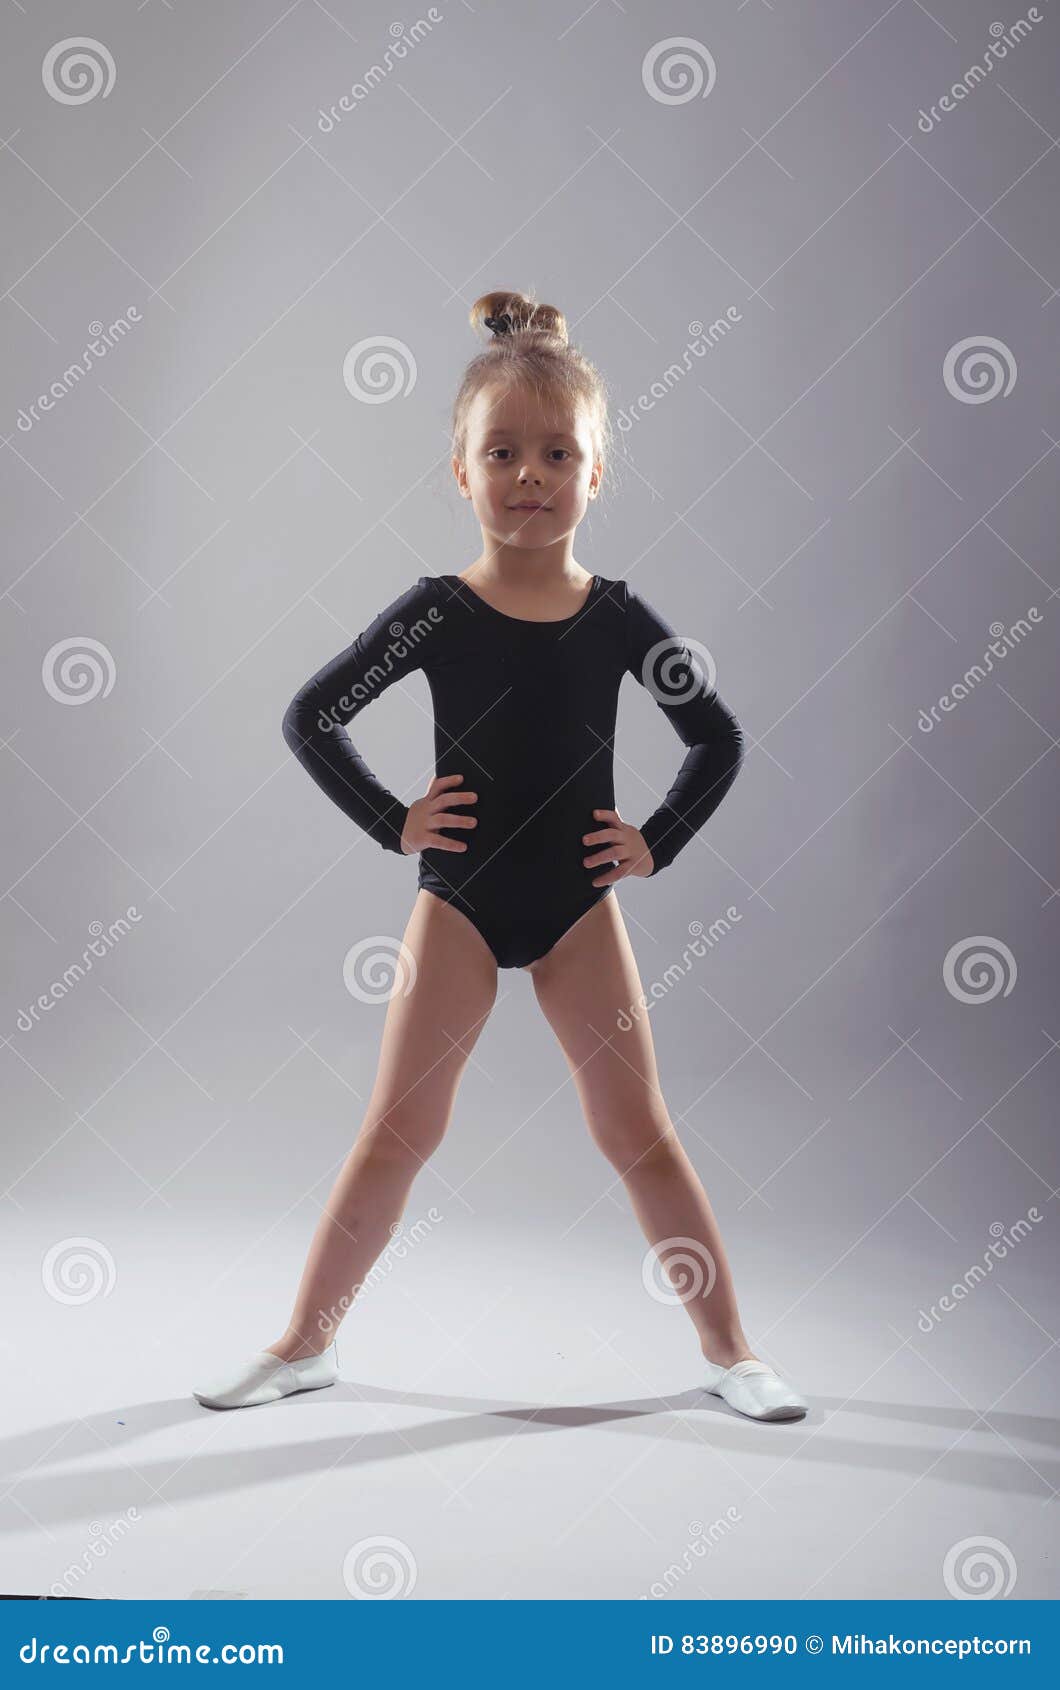 Little Girl in Black Tights Dancing on a Gray Background. Stock Photo -  Image of suit, ballerina: 83896990